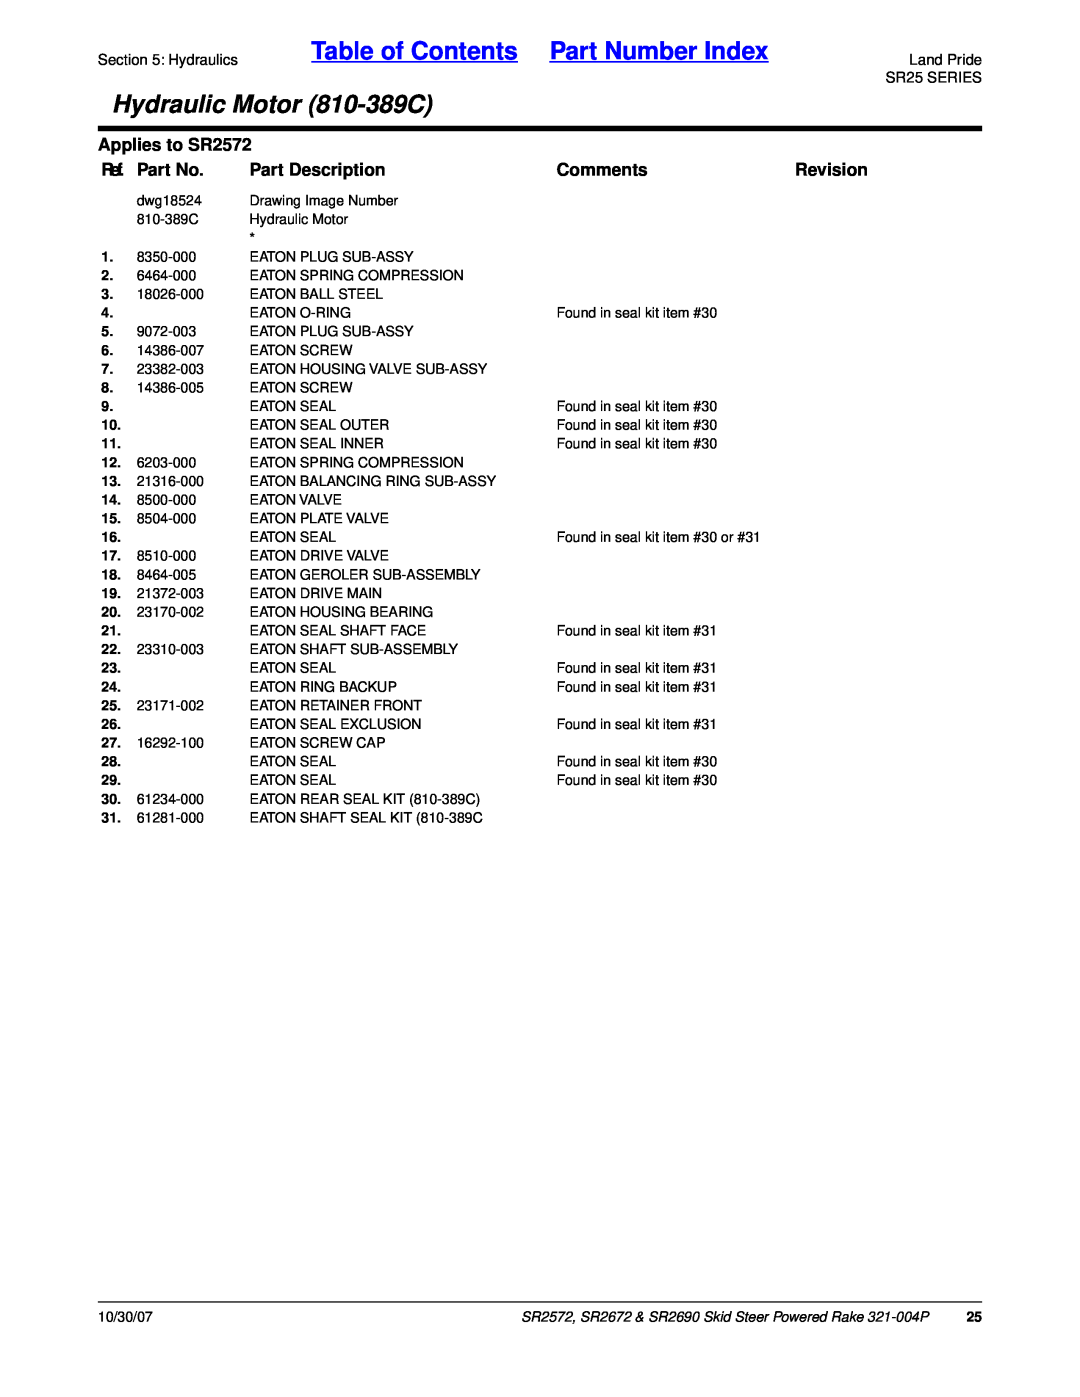 Land Pride SR2672 Table of Contents Part Number Index, Hydraulic Motor 810-389C, Applies to SR2572, Ref. Part No, Comments 